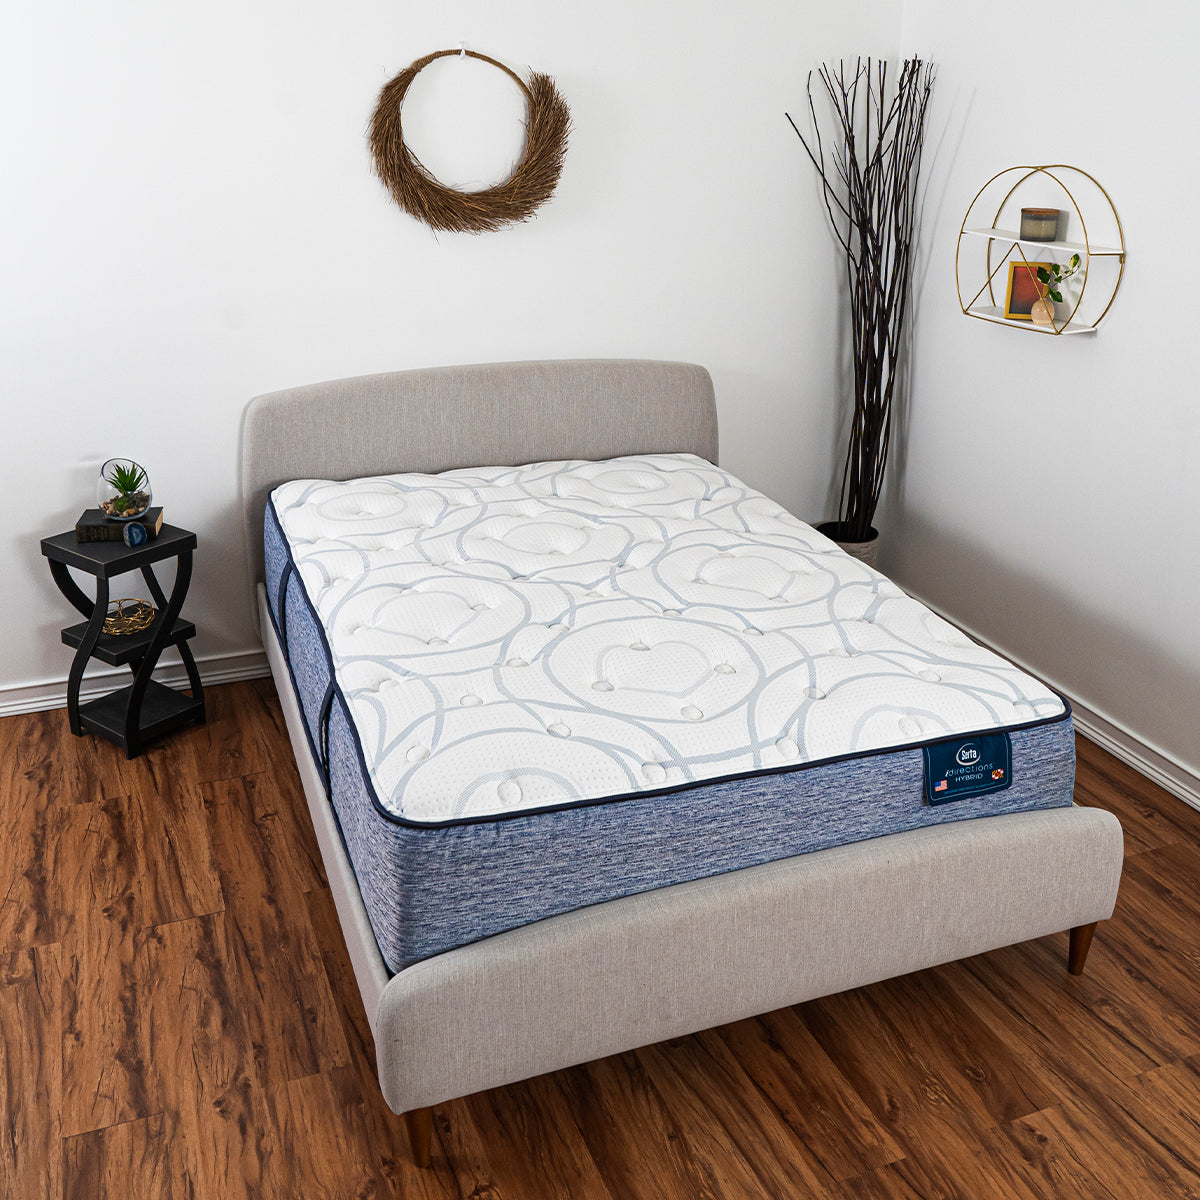 Picture of Floor Model In Store Only - Serta iDirections X7 Hybrid II Plush Mattress